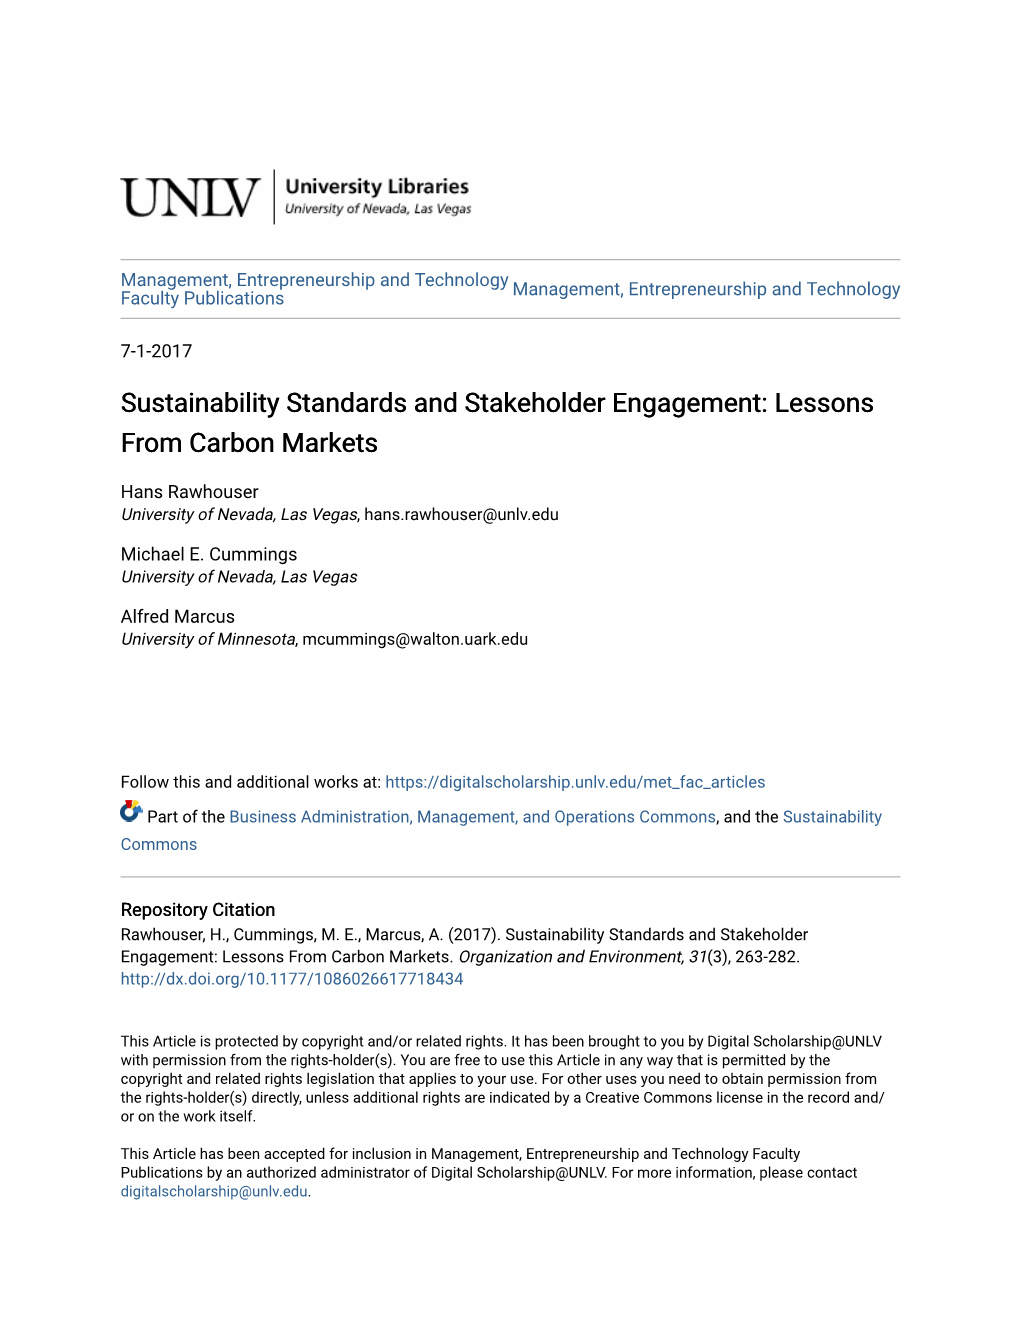 Sustainability Standards and Stakeholder Engagement: Lessons from Carbon Markets